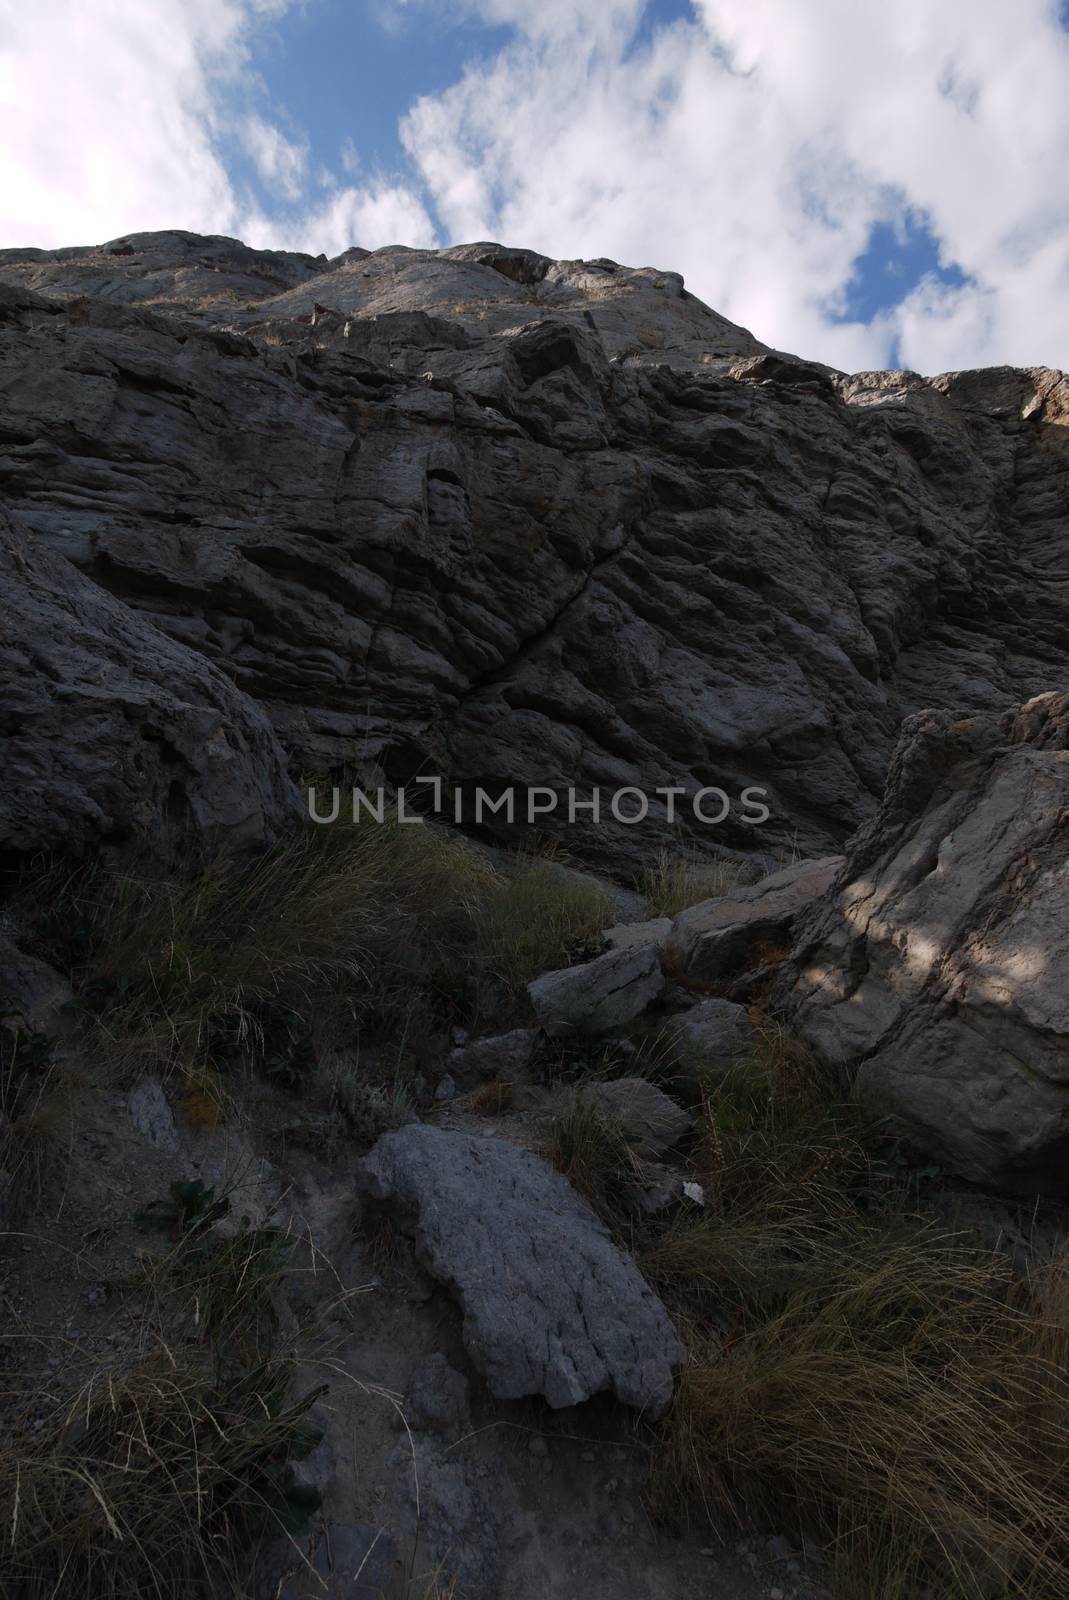 Grassy hollow in a rocky mountain against a blue sky with white clouds by Adamchuk